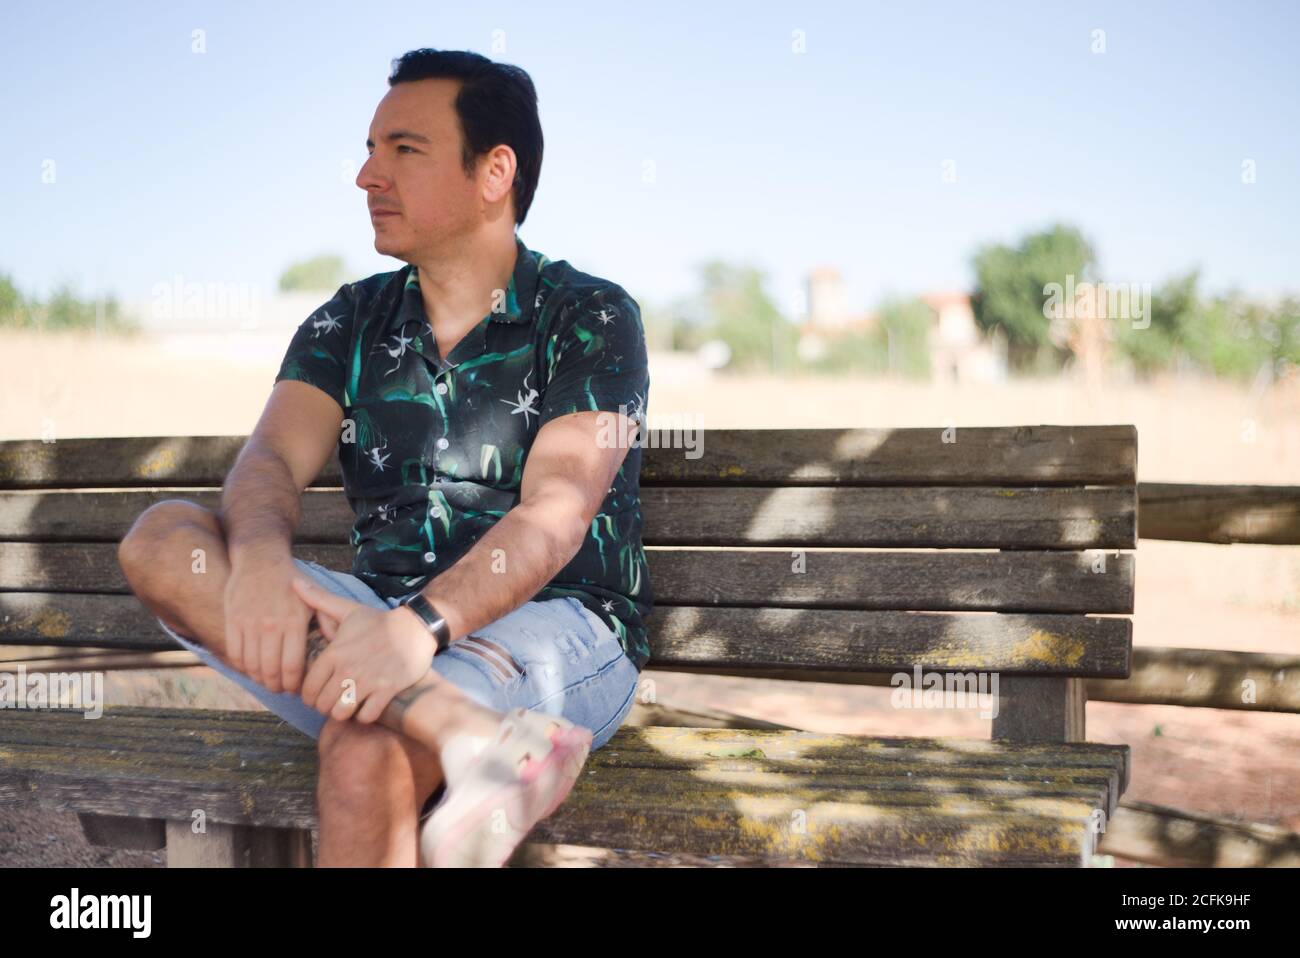 Man with positive and thoughtful attitude in an outdoor location. Stock Photo